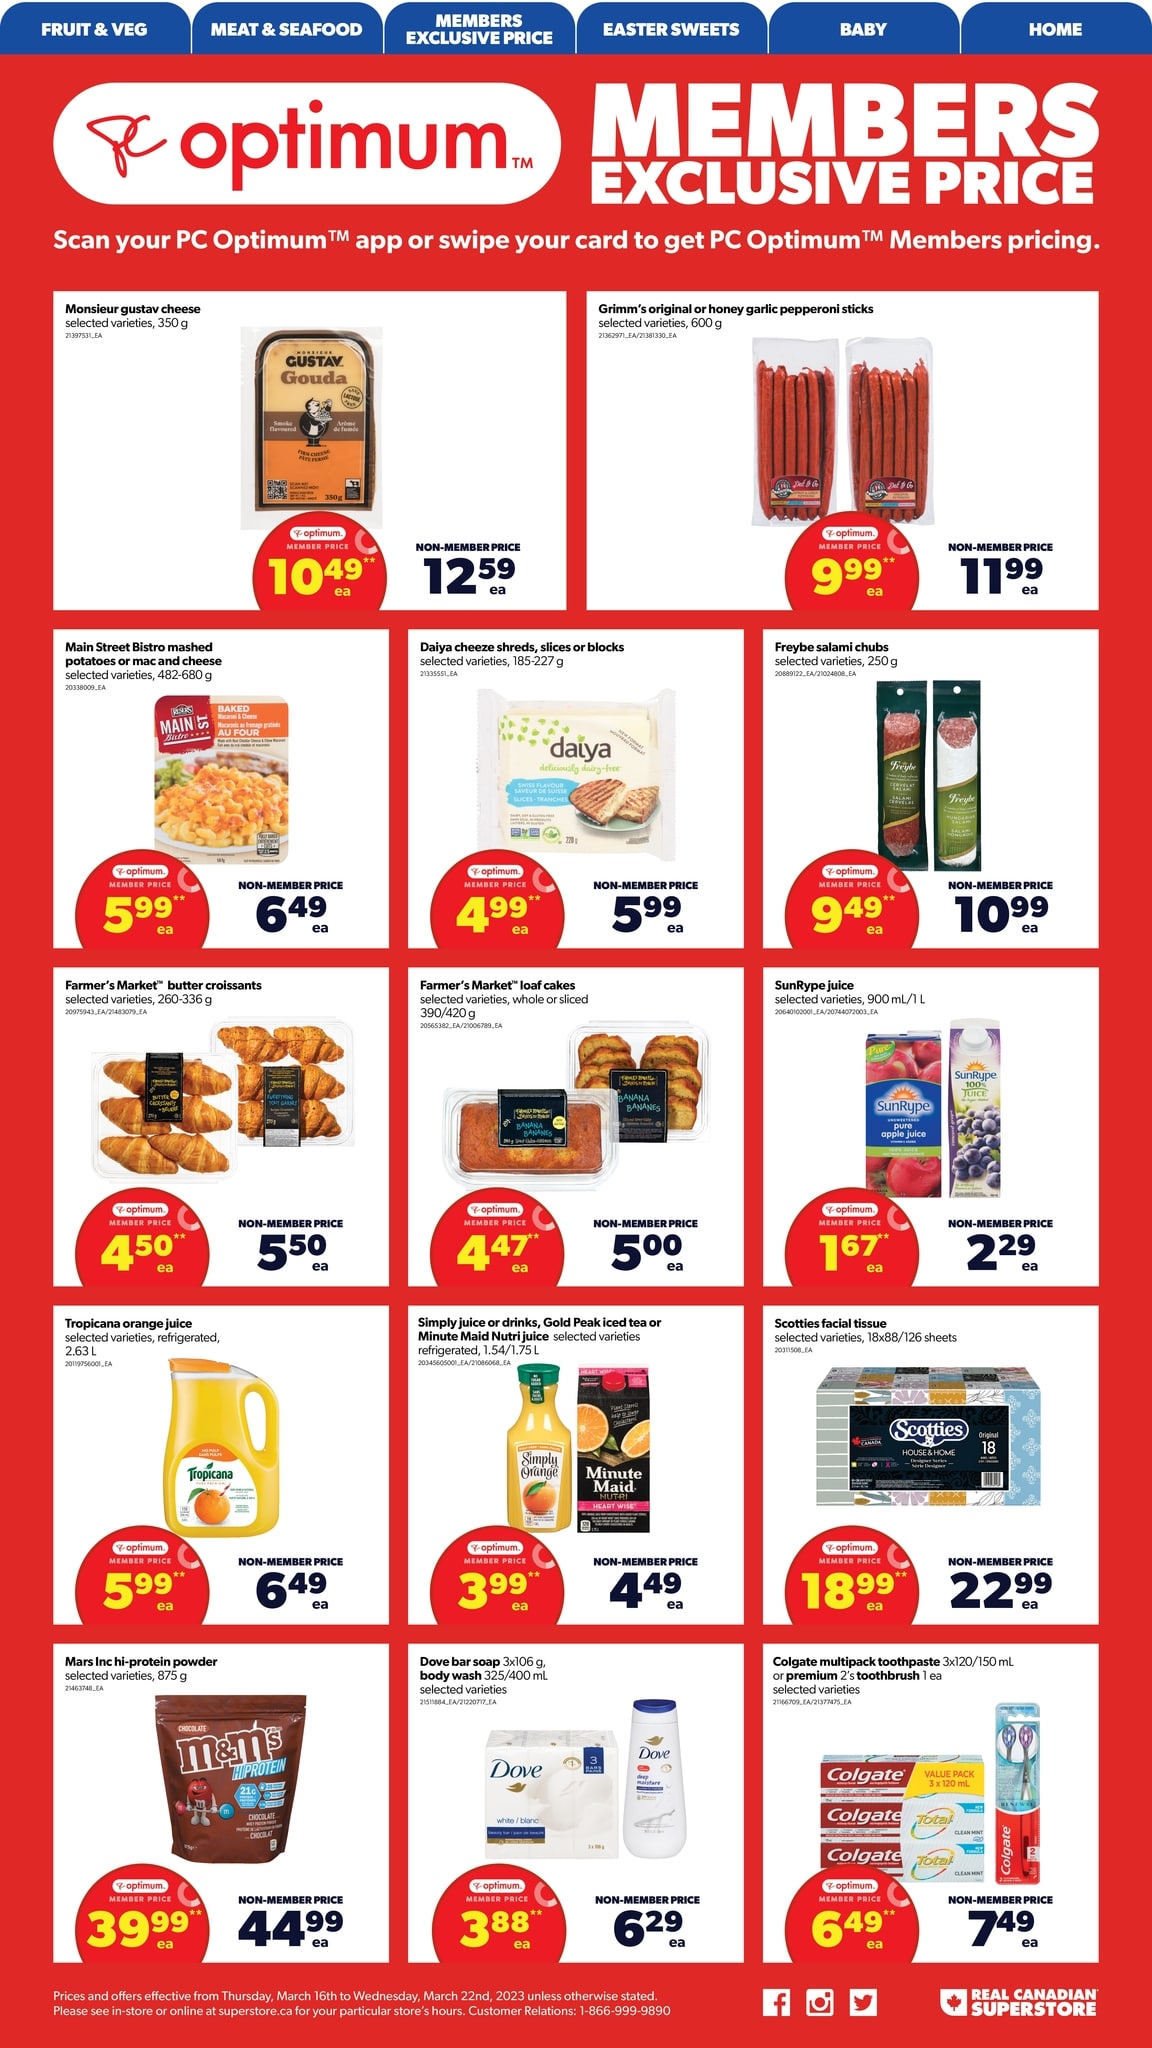 Real Canadian Superstore - Western Canada - Weekly Flyer Specials - Page 6